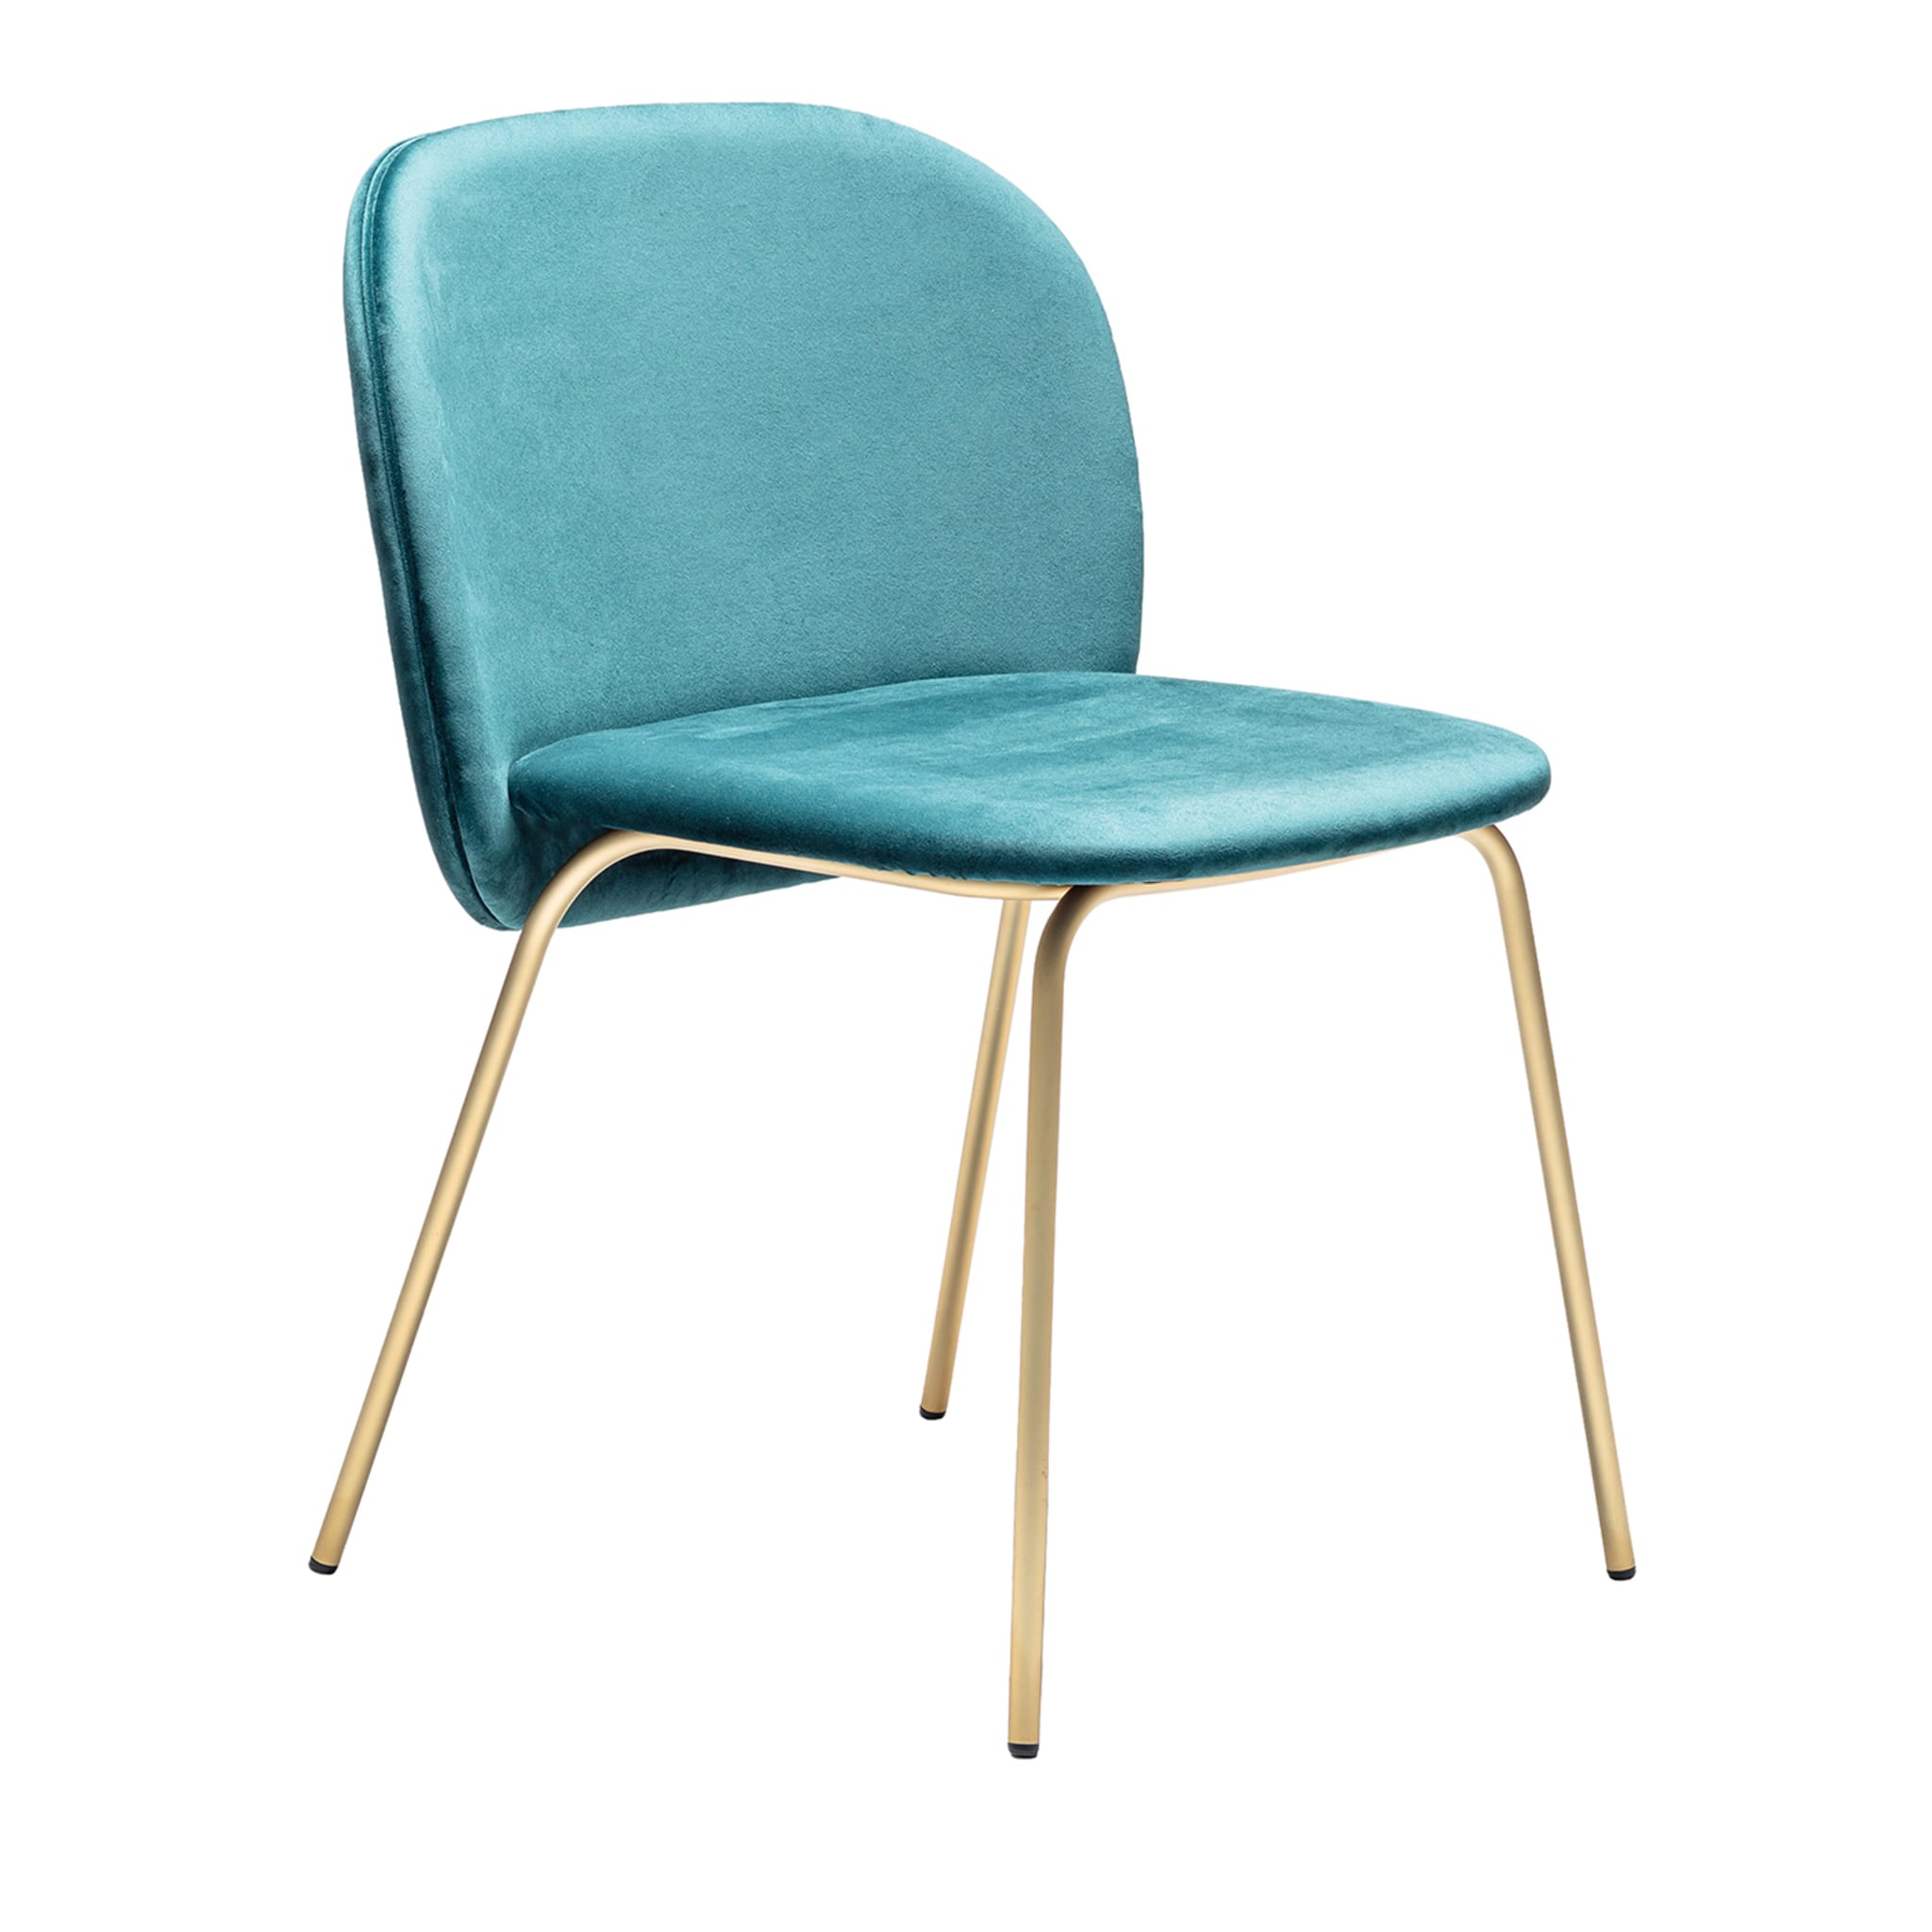 Chips M Blue Chair by Studio Pastina - Main view